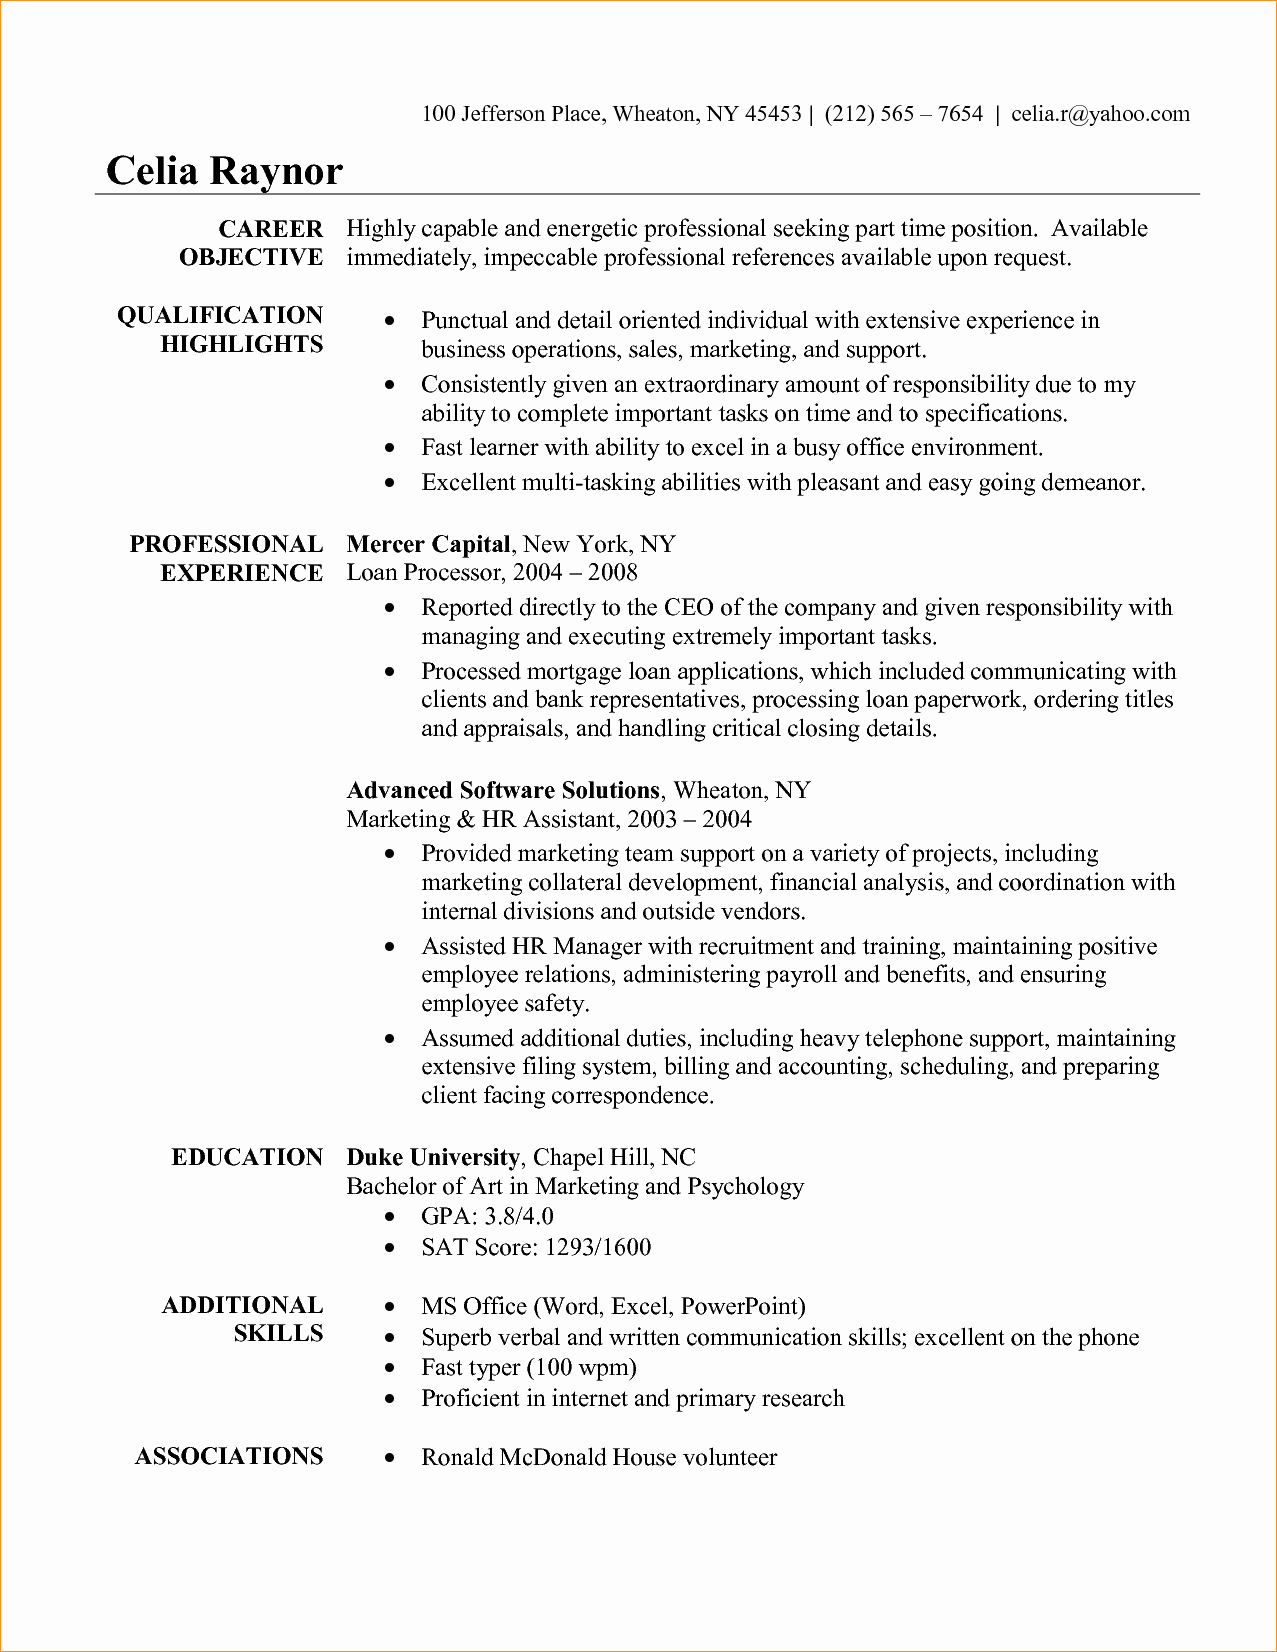 Administrative assistant Skills Business Proposal